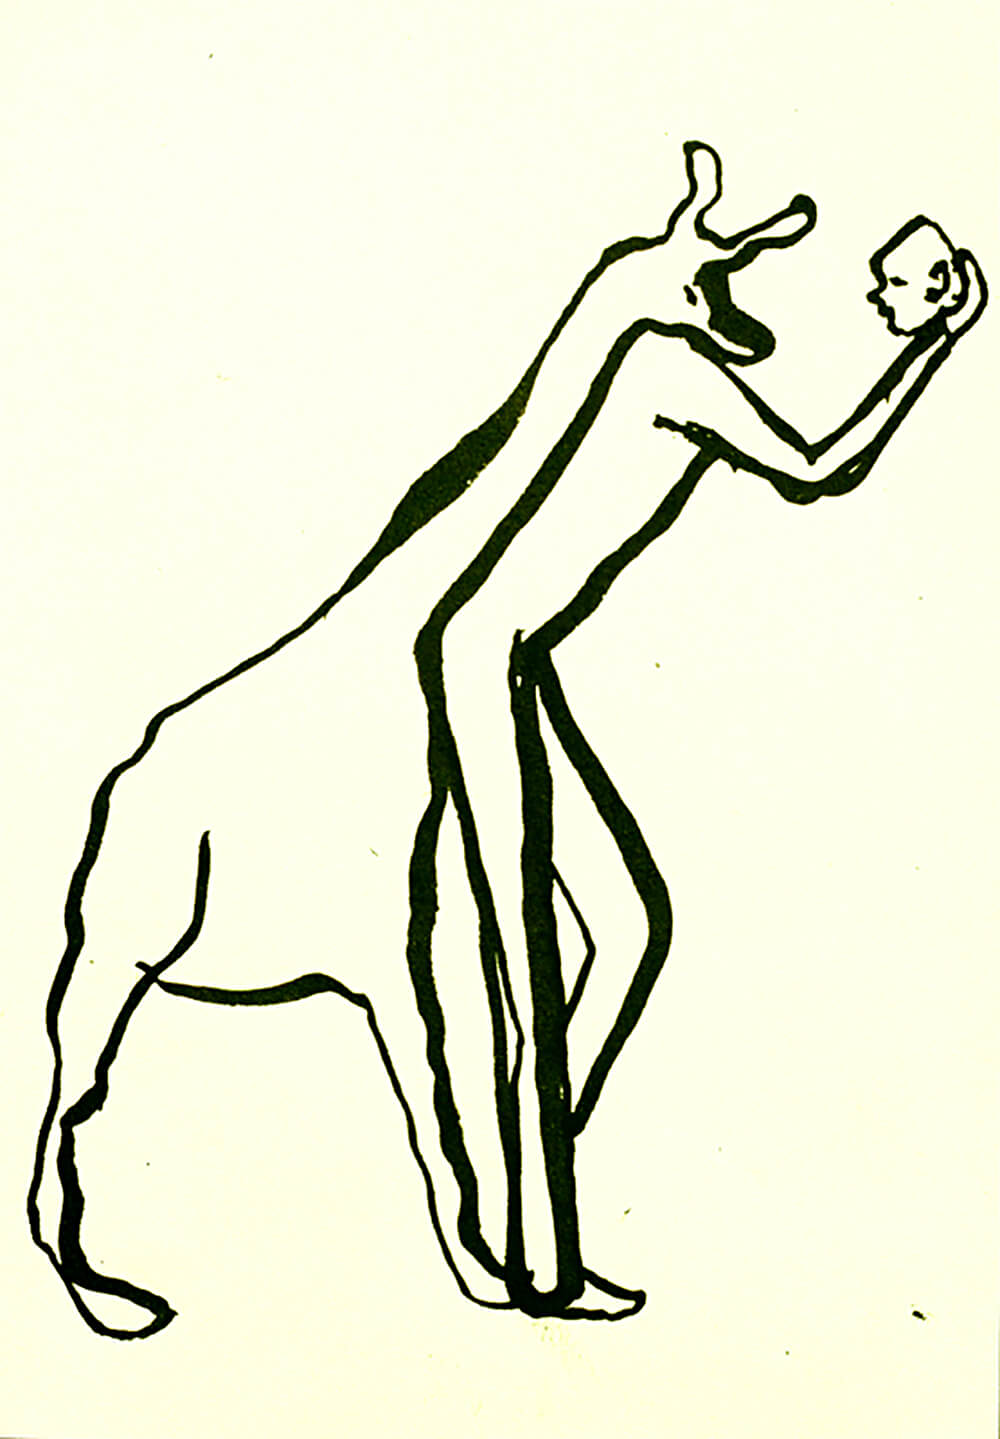 untitled (giraffe, man and head), 16 x 11 cm, ink on paper, 2000